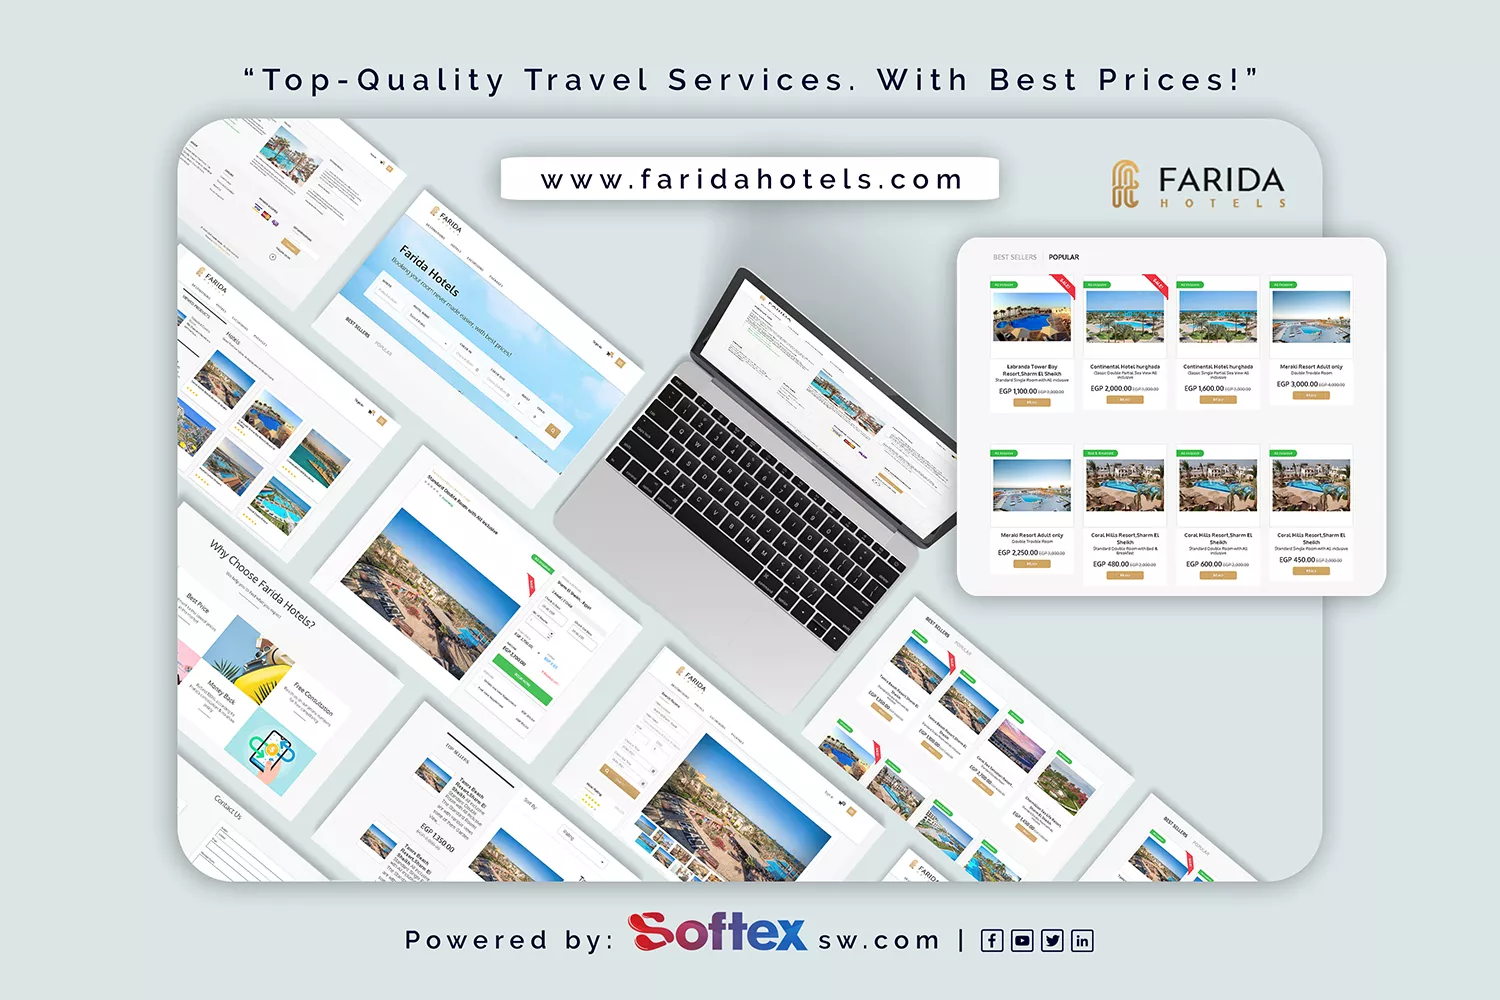 Softex launched FaridaHotels Website